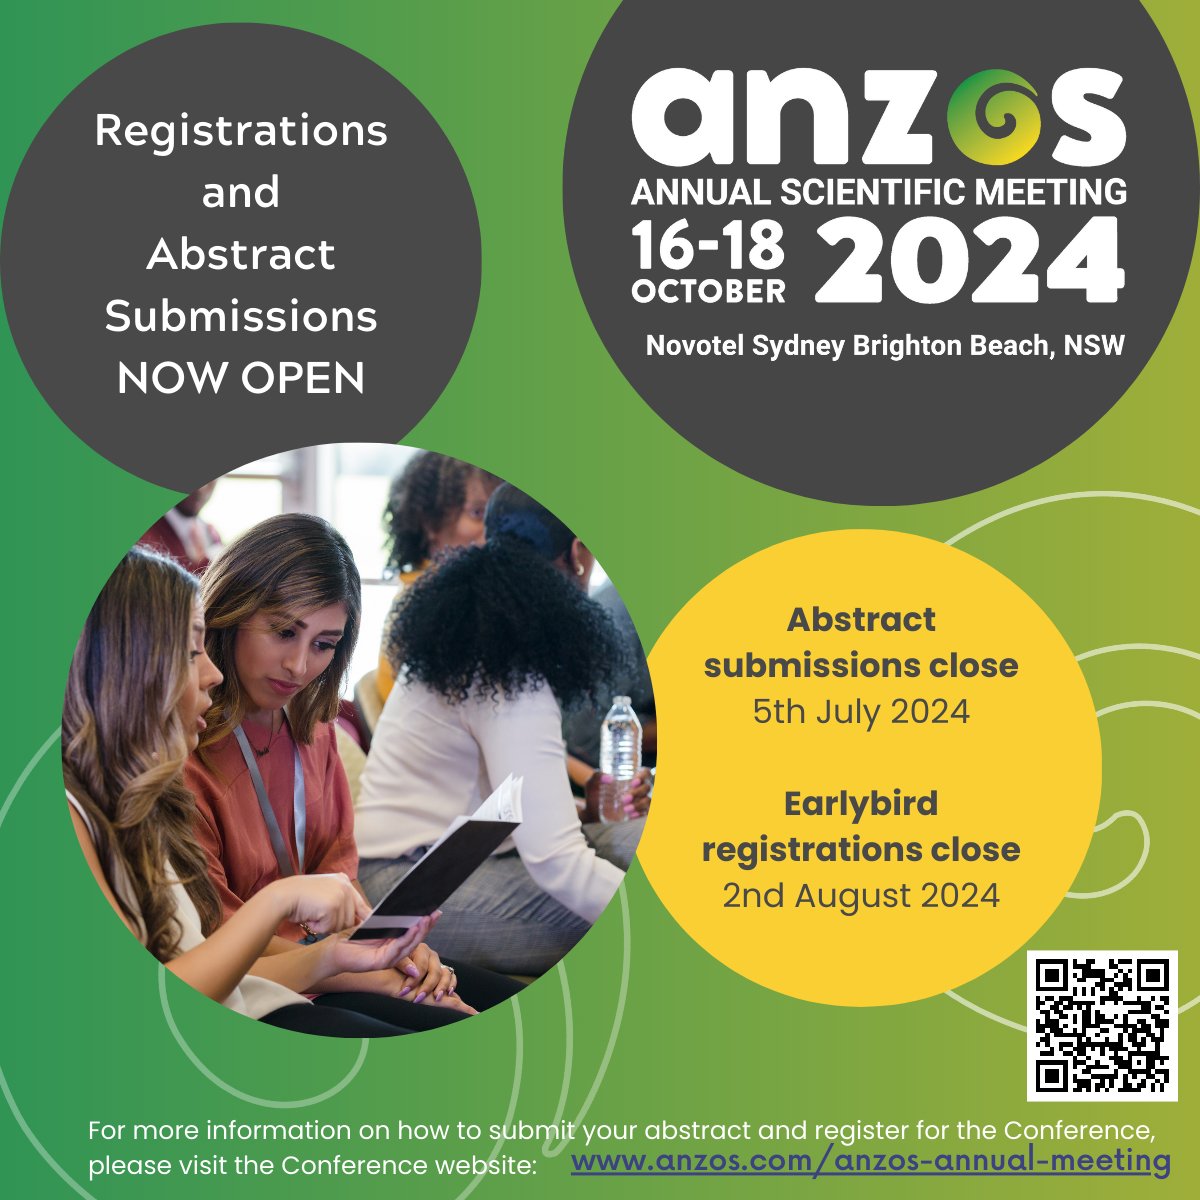 📢Registration and abstract submissions are now OPEN 👉 #ANZOS2024 Annual Scientific Meeting! Don't miss this chance to hear from brilliant speakers, engage with colleagues, and dive into the latest in #ObesityResearch. Join us for an unforgettable meeting! #LetsTalkAboutObesity